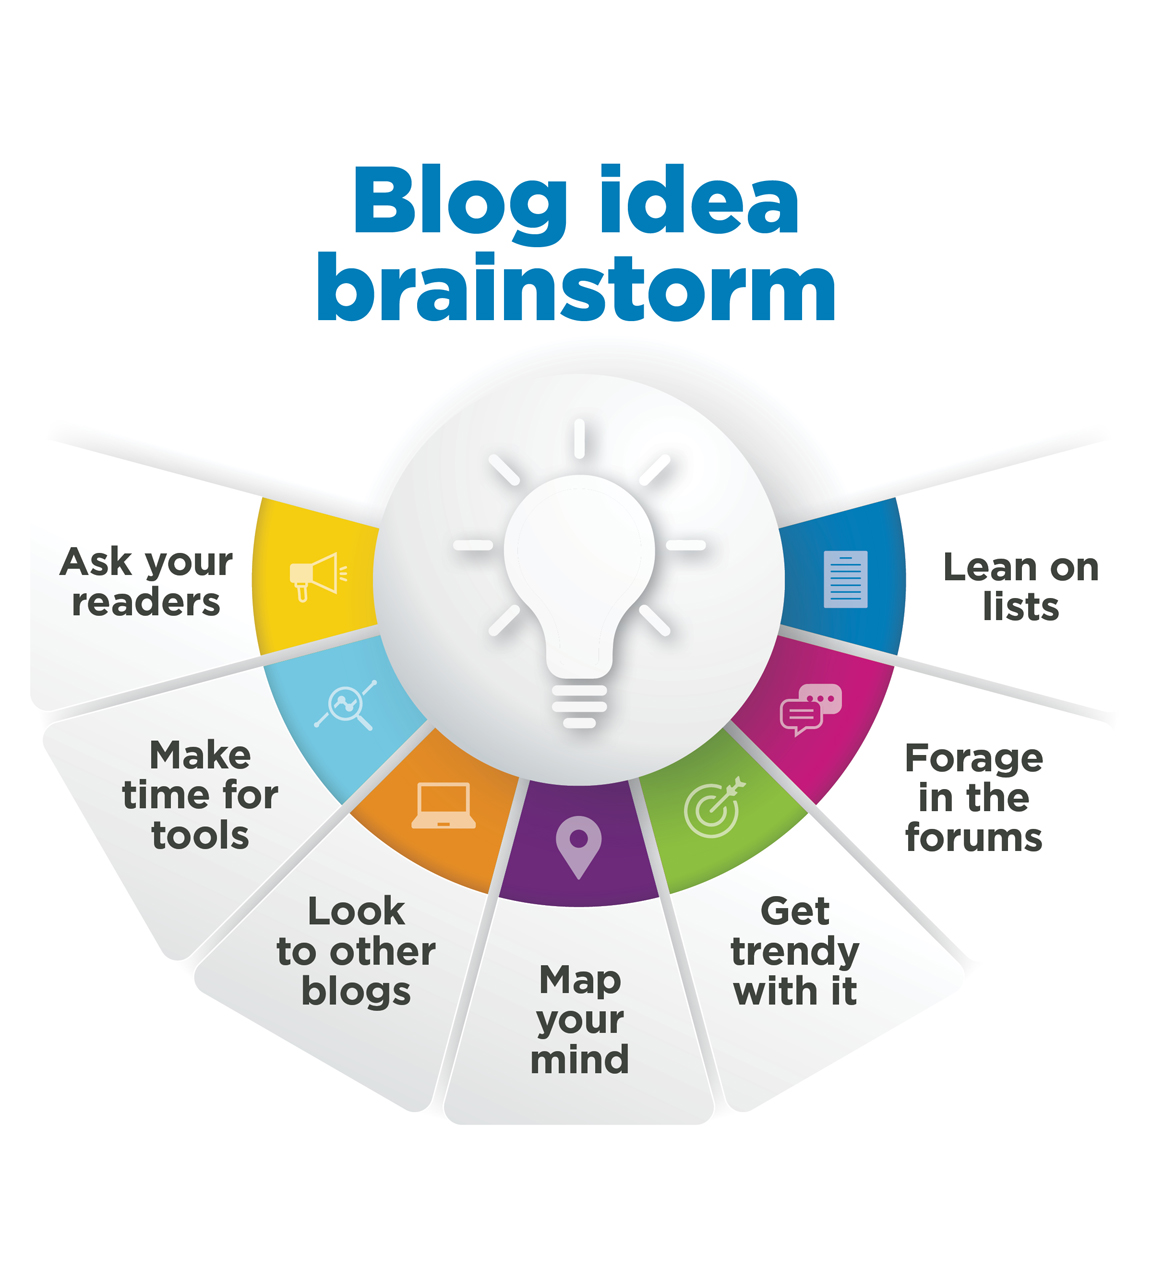 A graphic showcasing WG Content's approach to brainstorming blog ideas